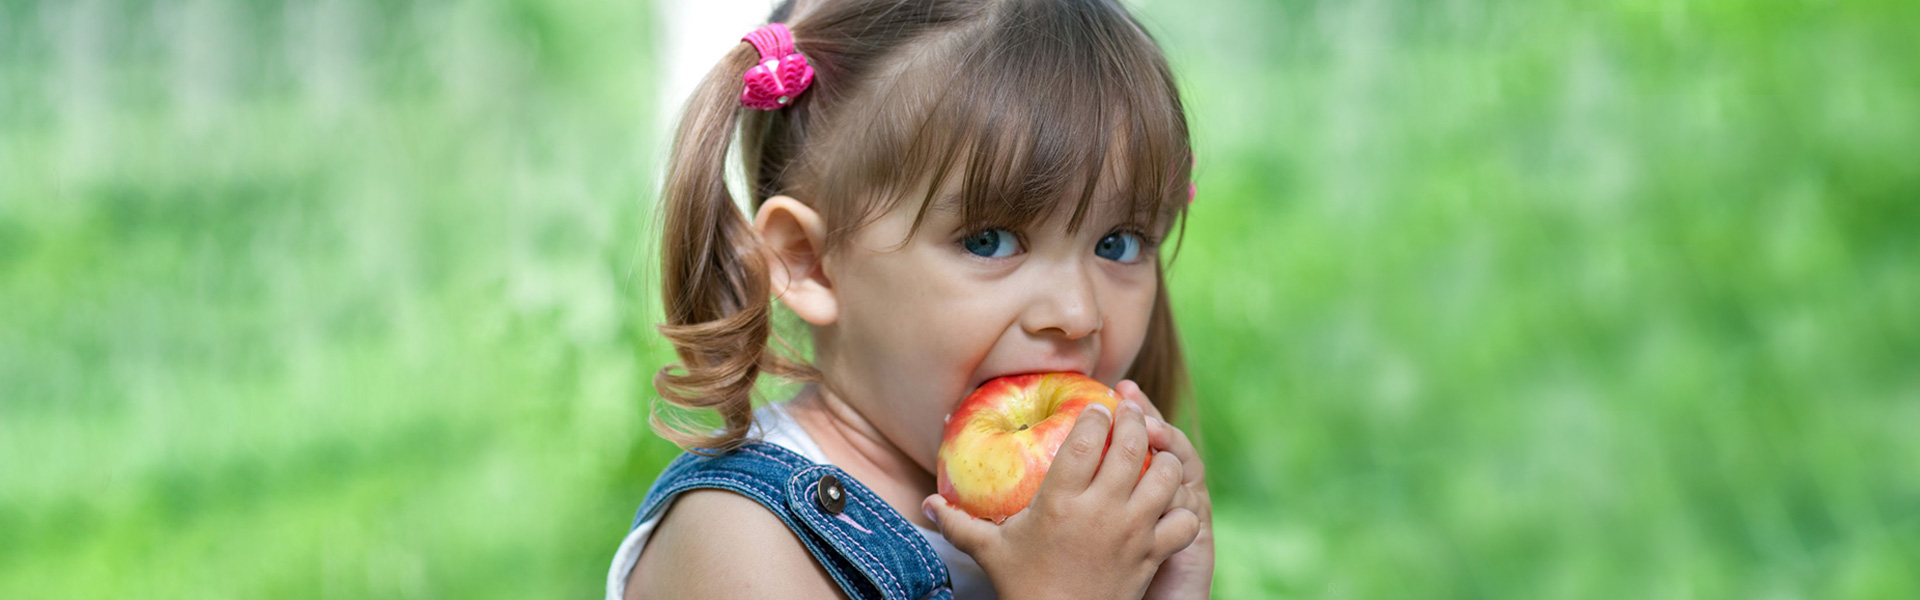 A 7 Day MIND Diet Plan to Boost and Improve Your Child's Brain Health